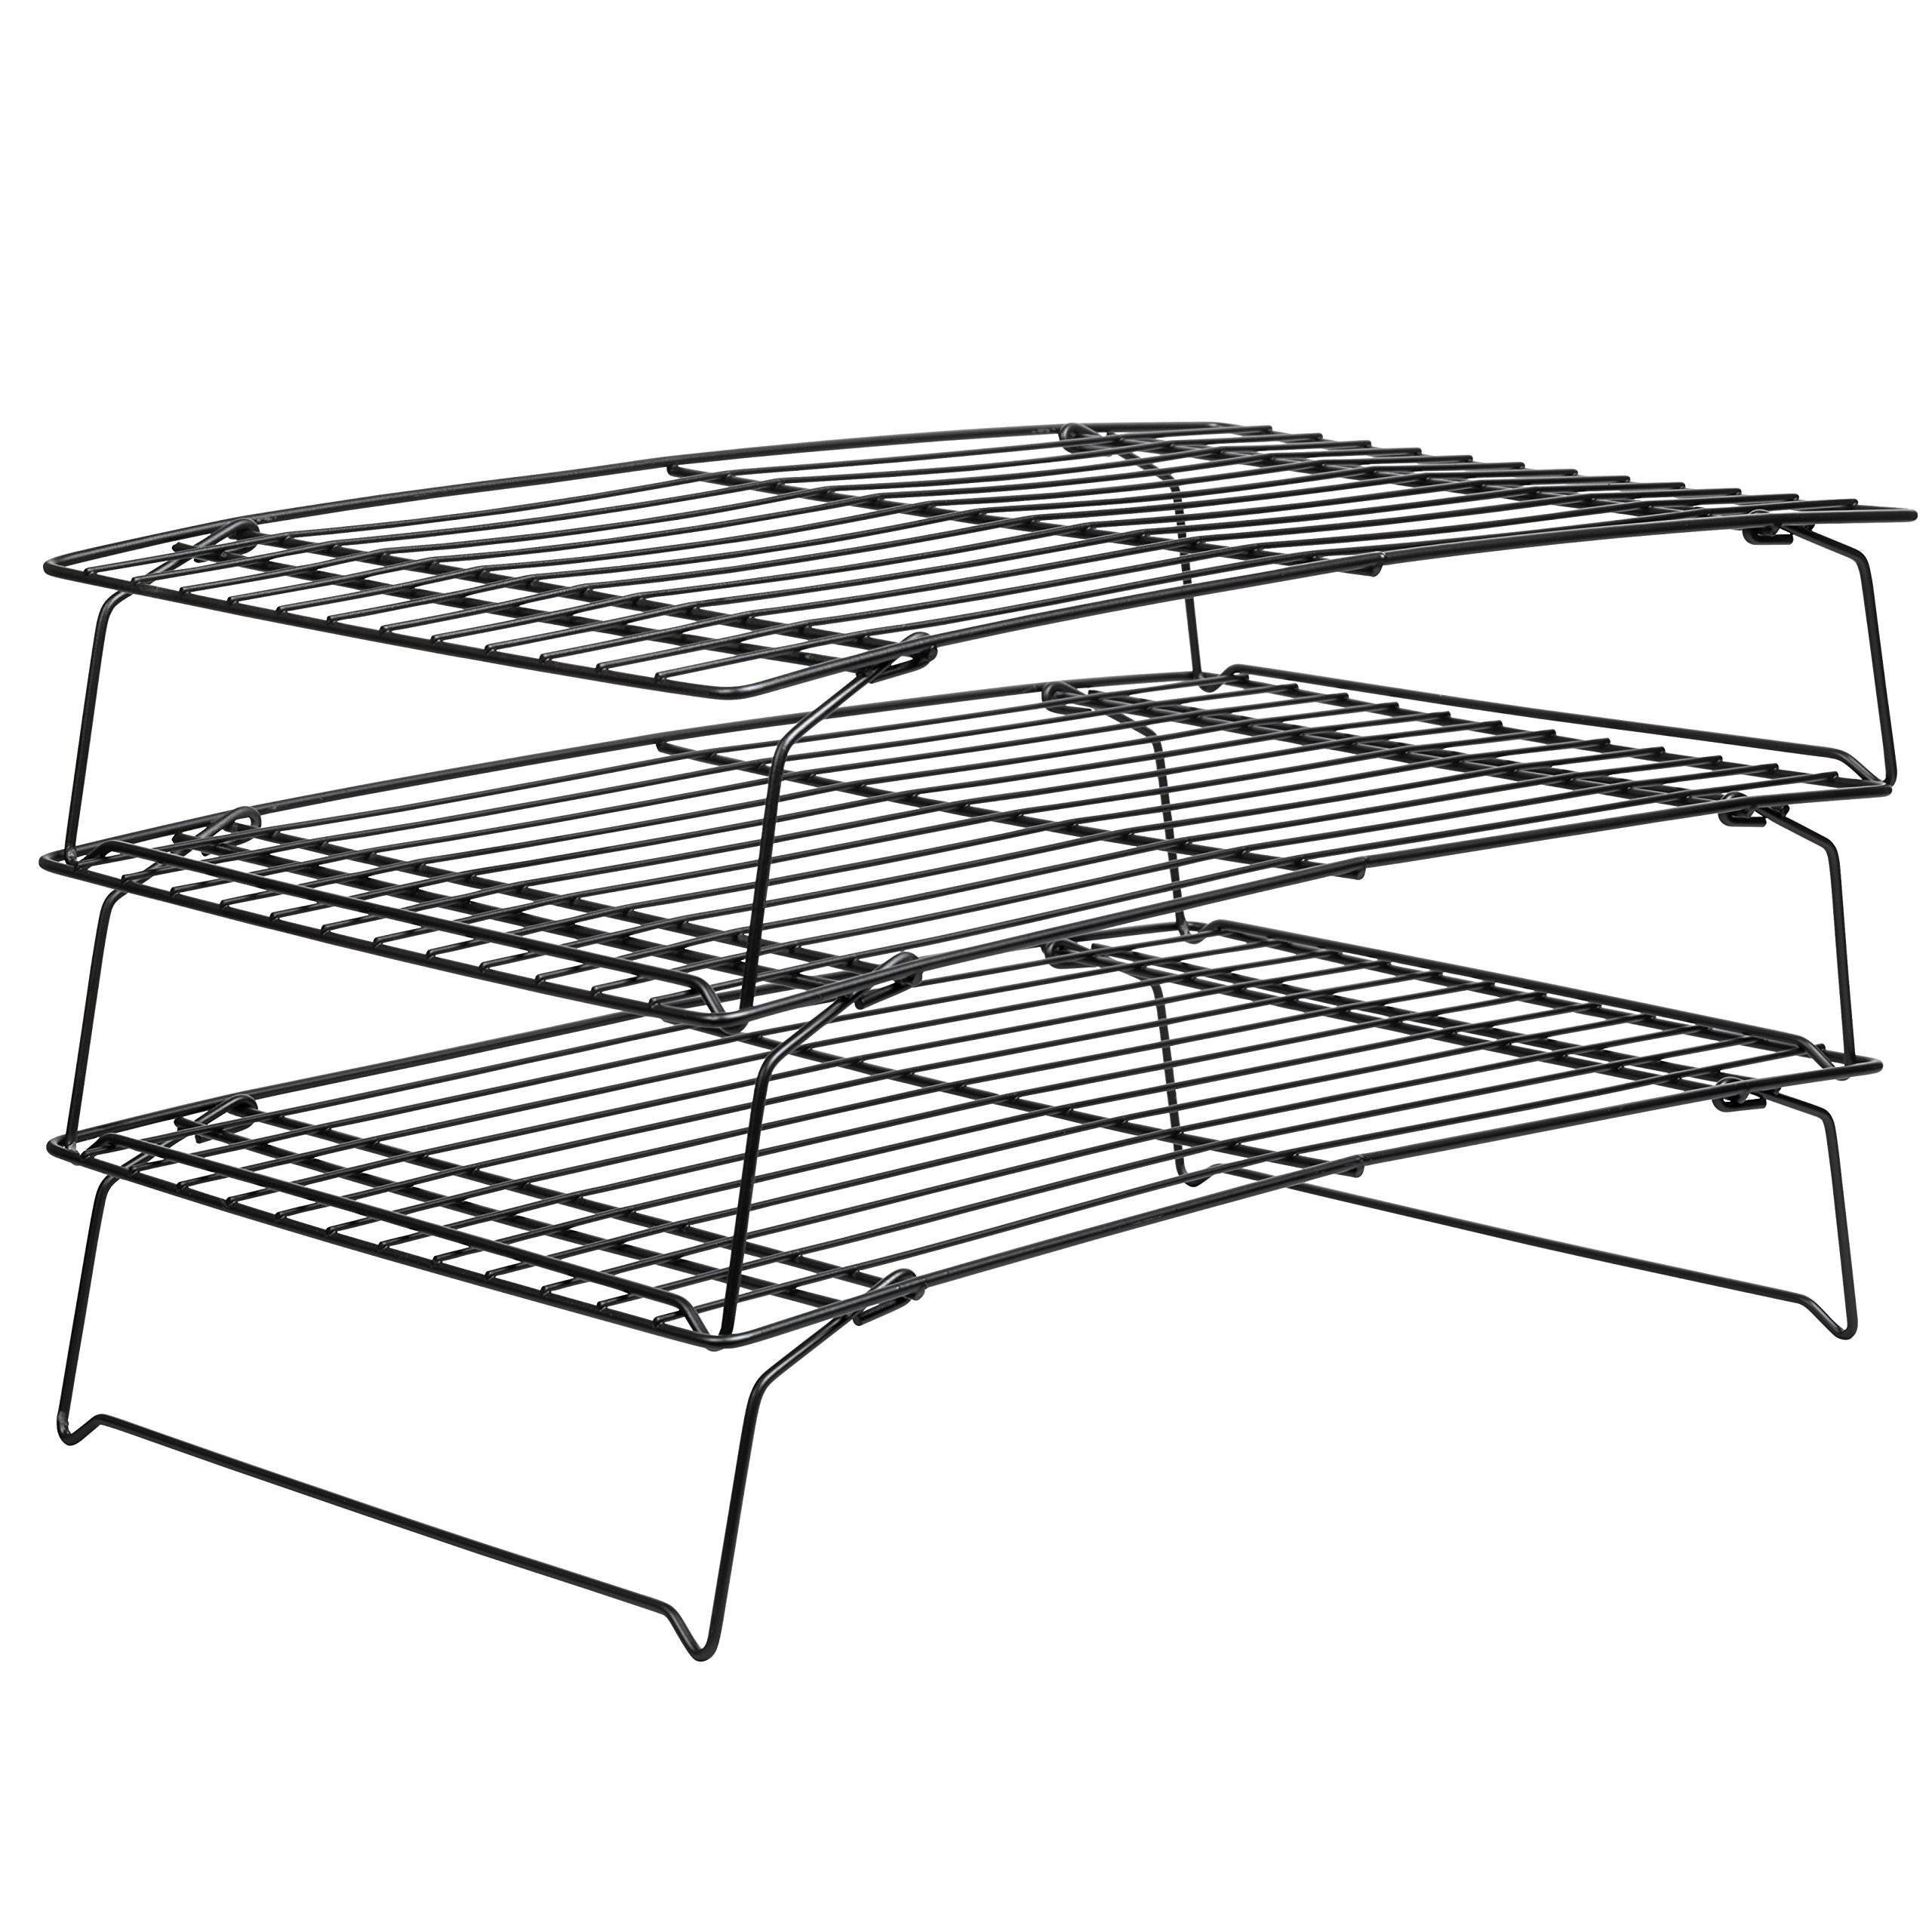 3-Tier Wilton Perfect Results Cooling Rack $7.49 + Free Shipping w/ Prime or on $35+